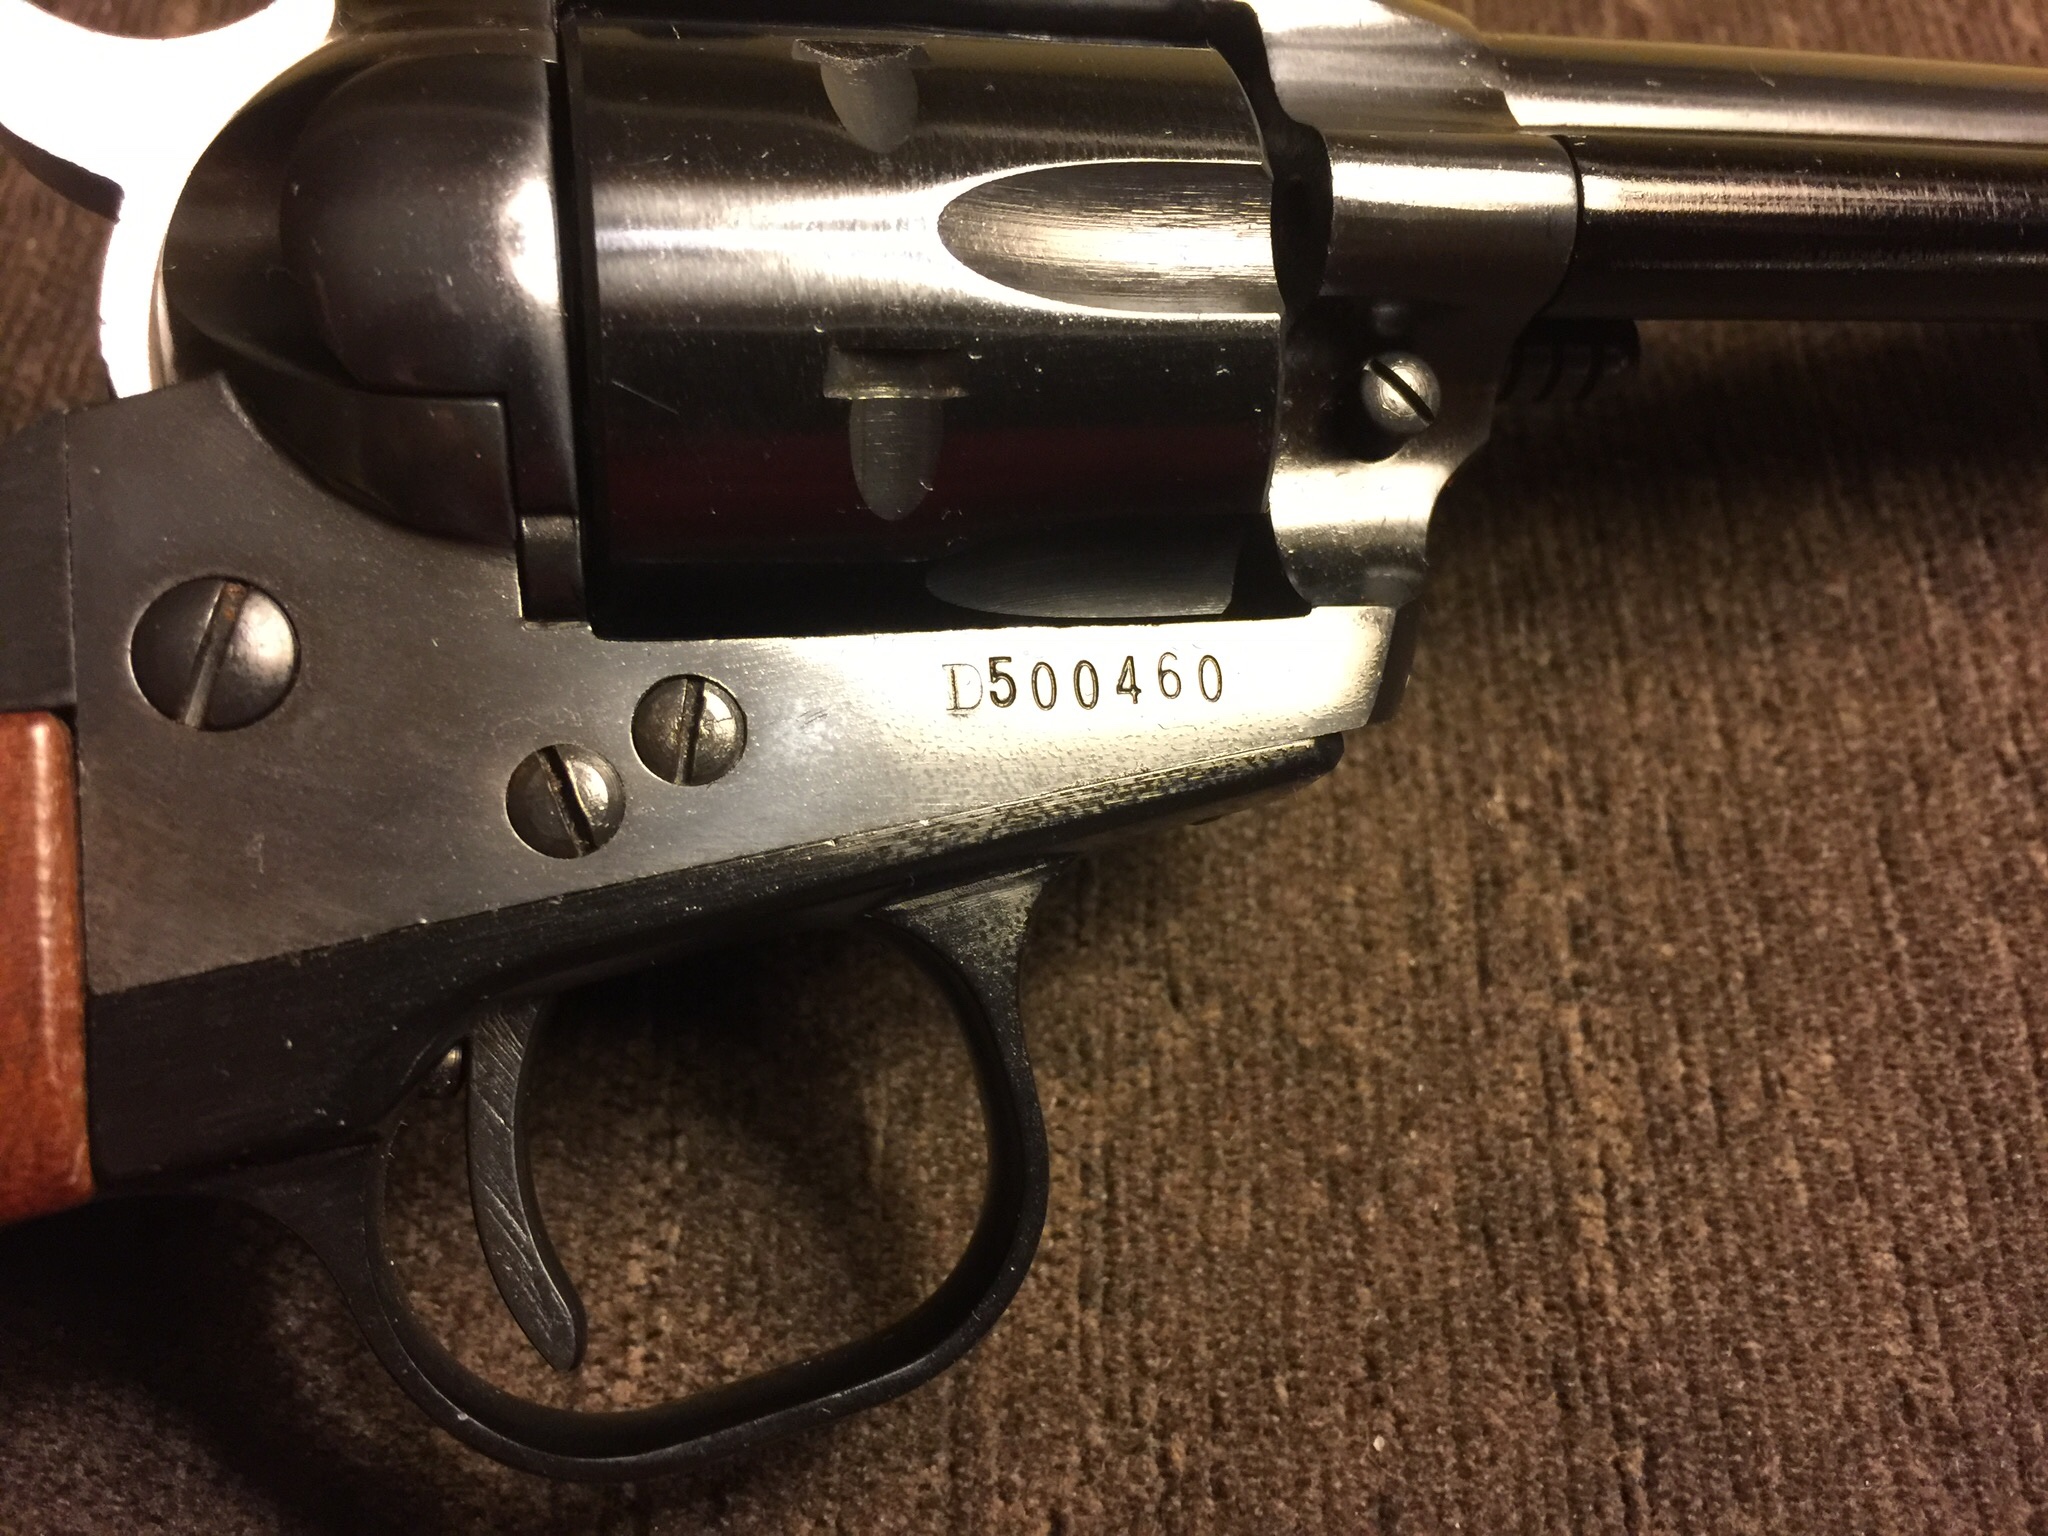 Ruger Single Six Serial Numbers